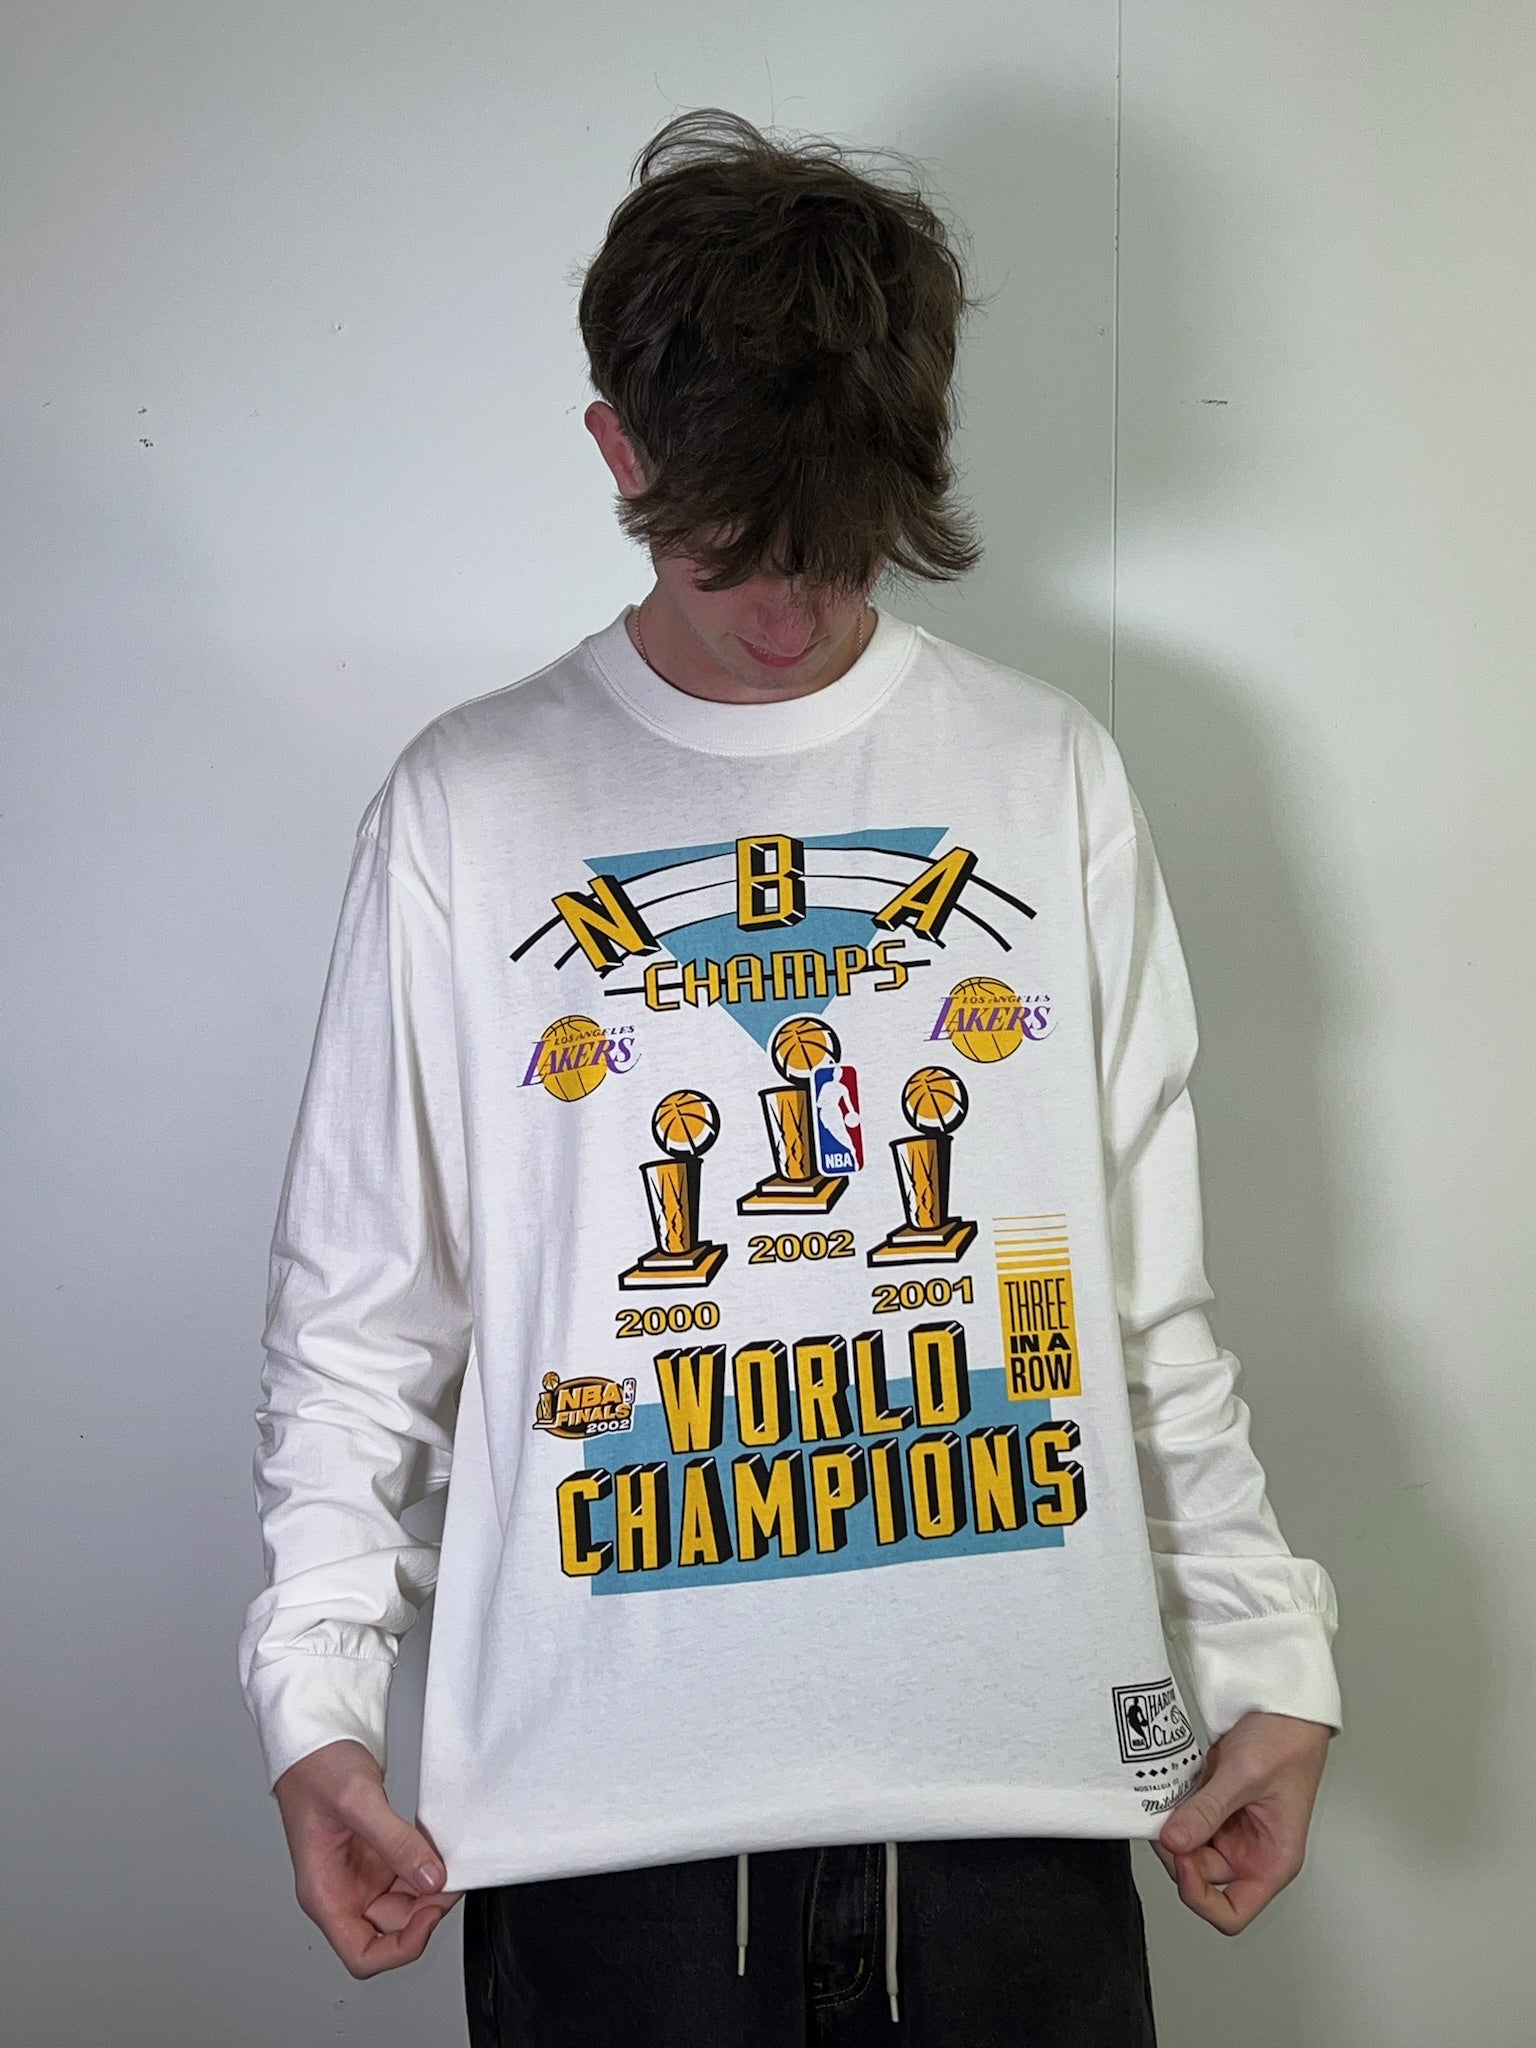 Official Vintage Los Angeles Lakers 2000 Champion World T-Shirt